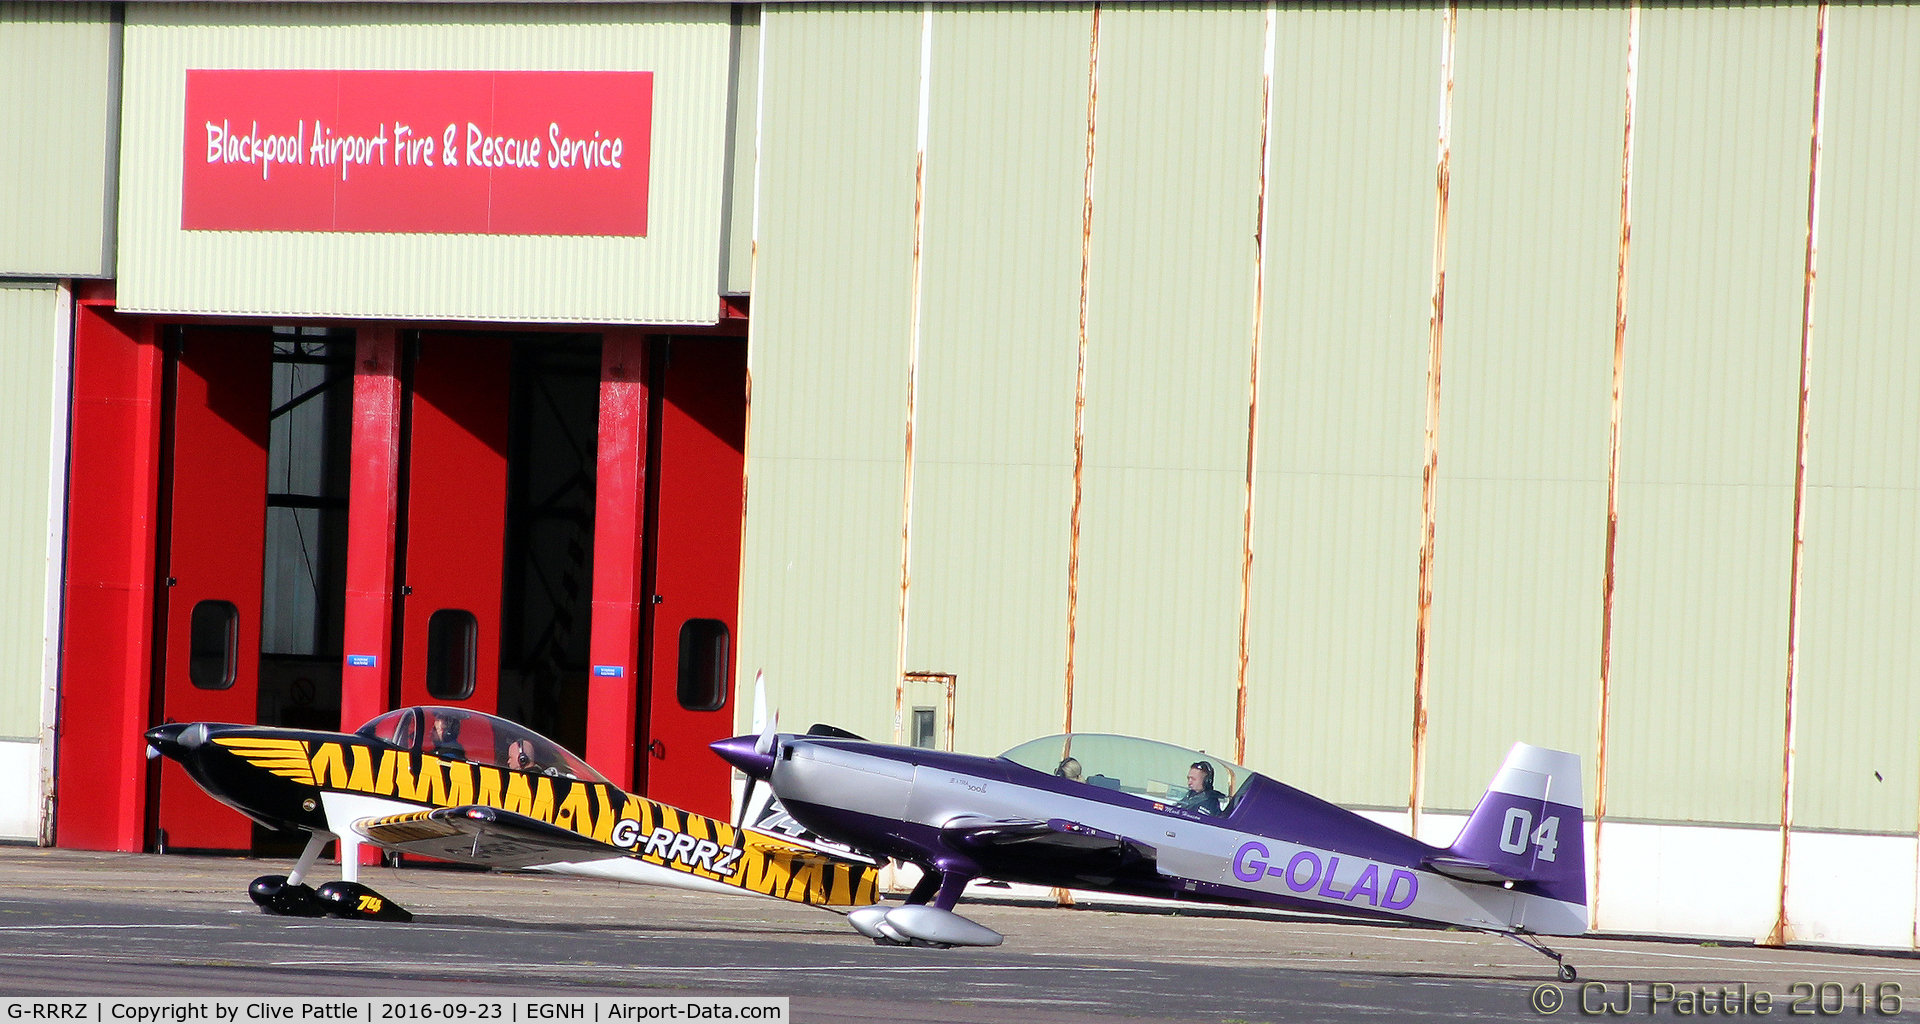 G-RRRZ, 2013 Vans RV-8 C/N PFA 305-15107, Seen in company with G-OLAD - At Blackpool EGNH